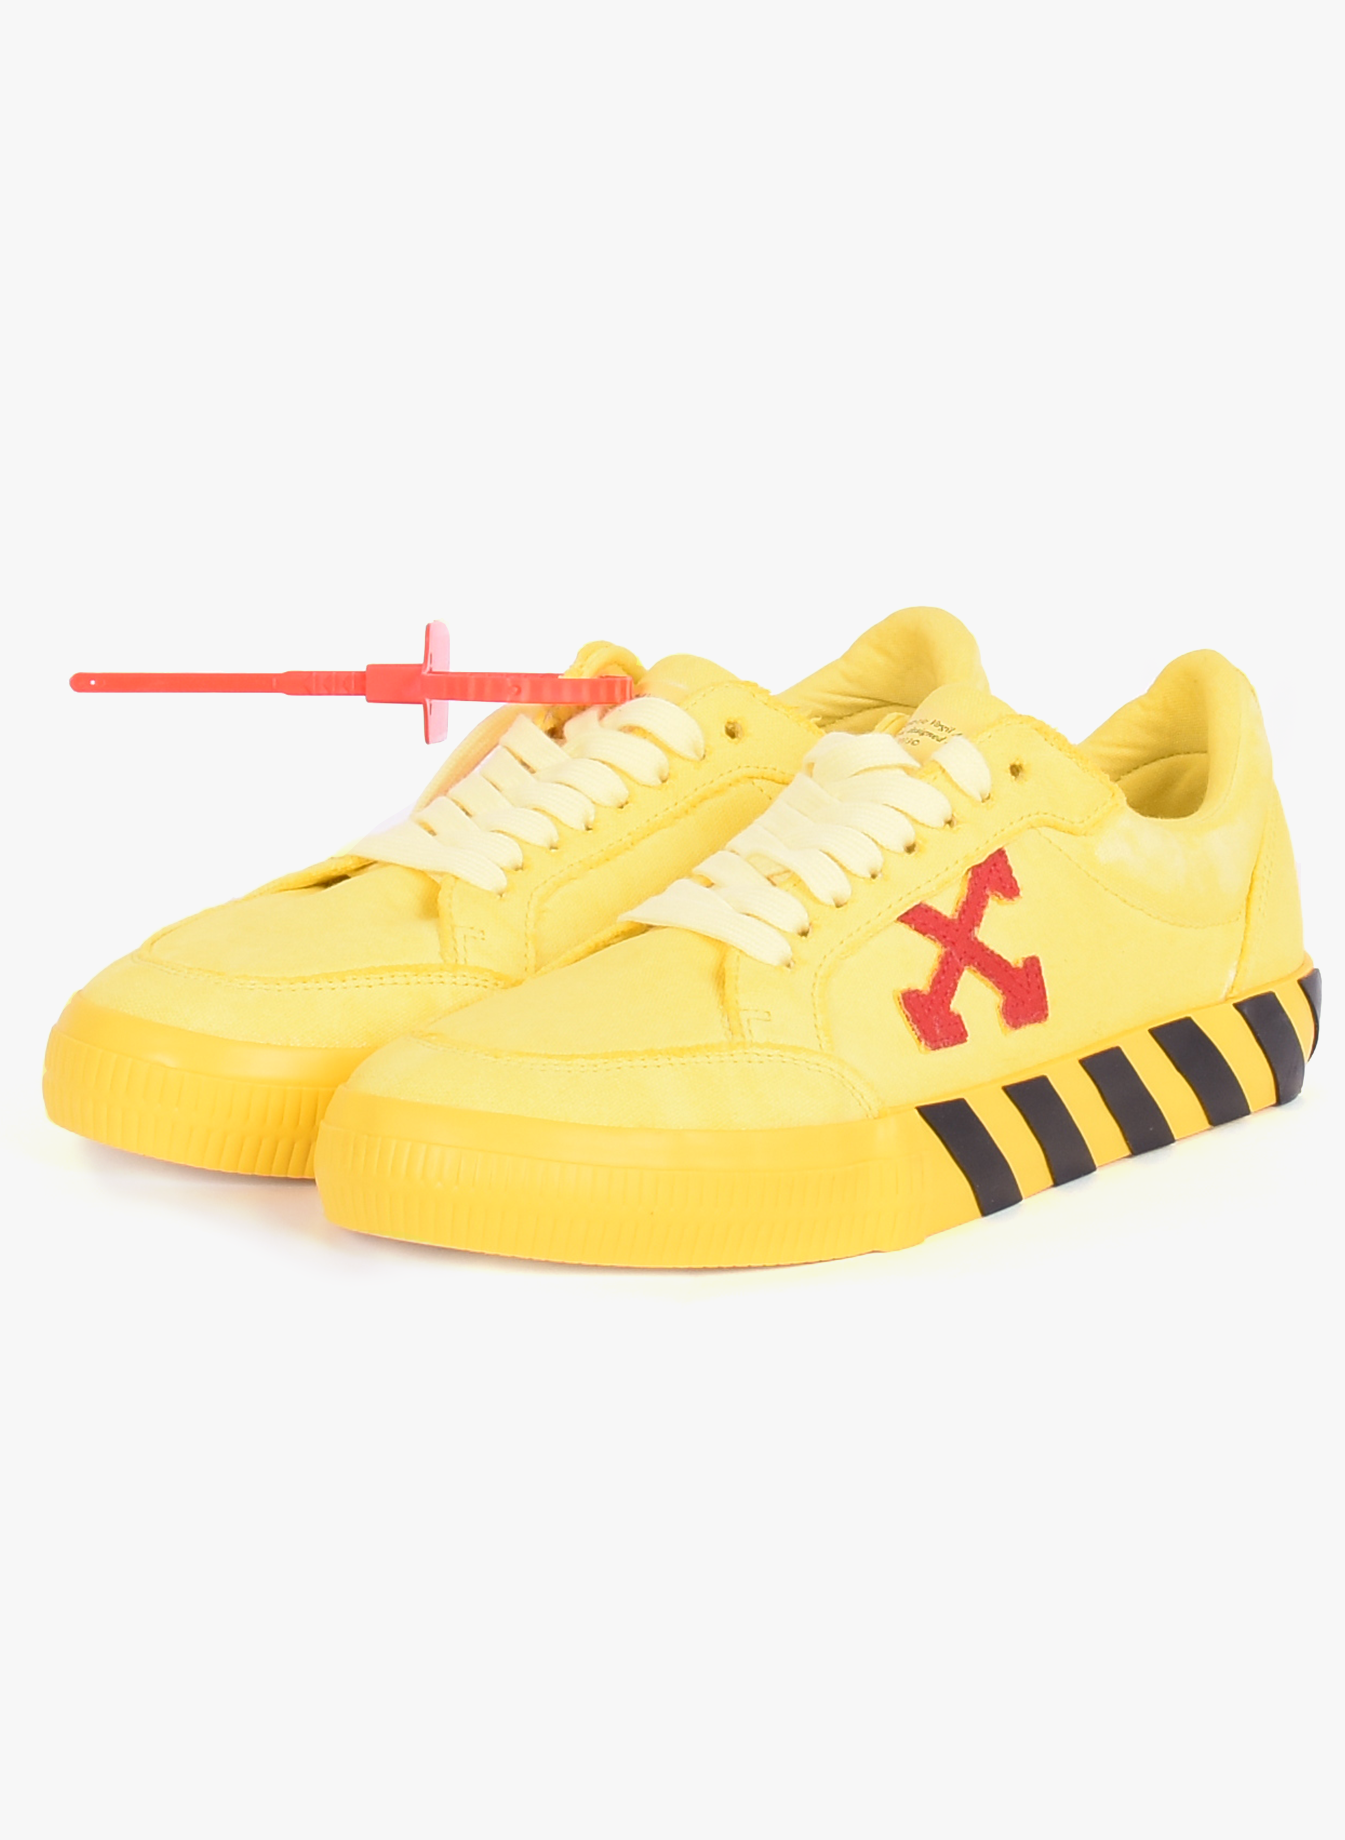 red and yellow sneakers